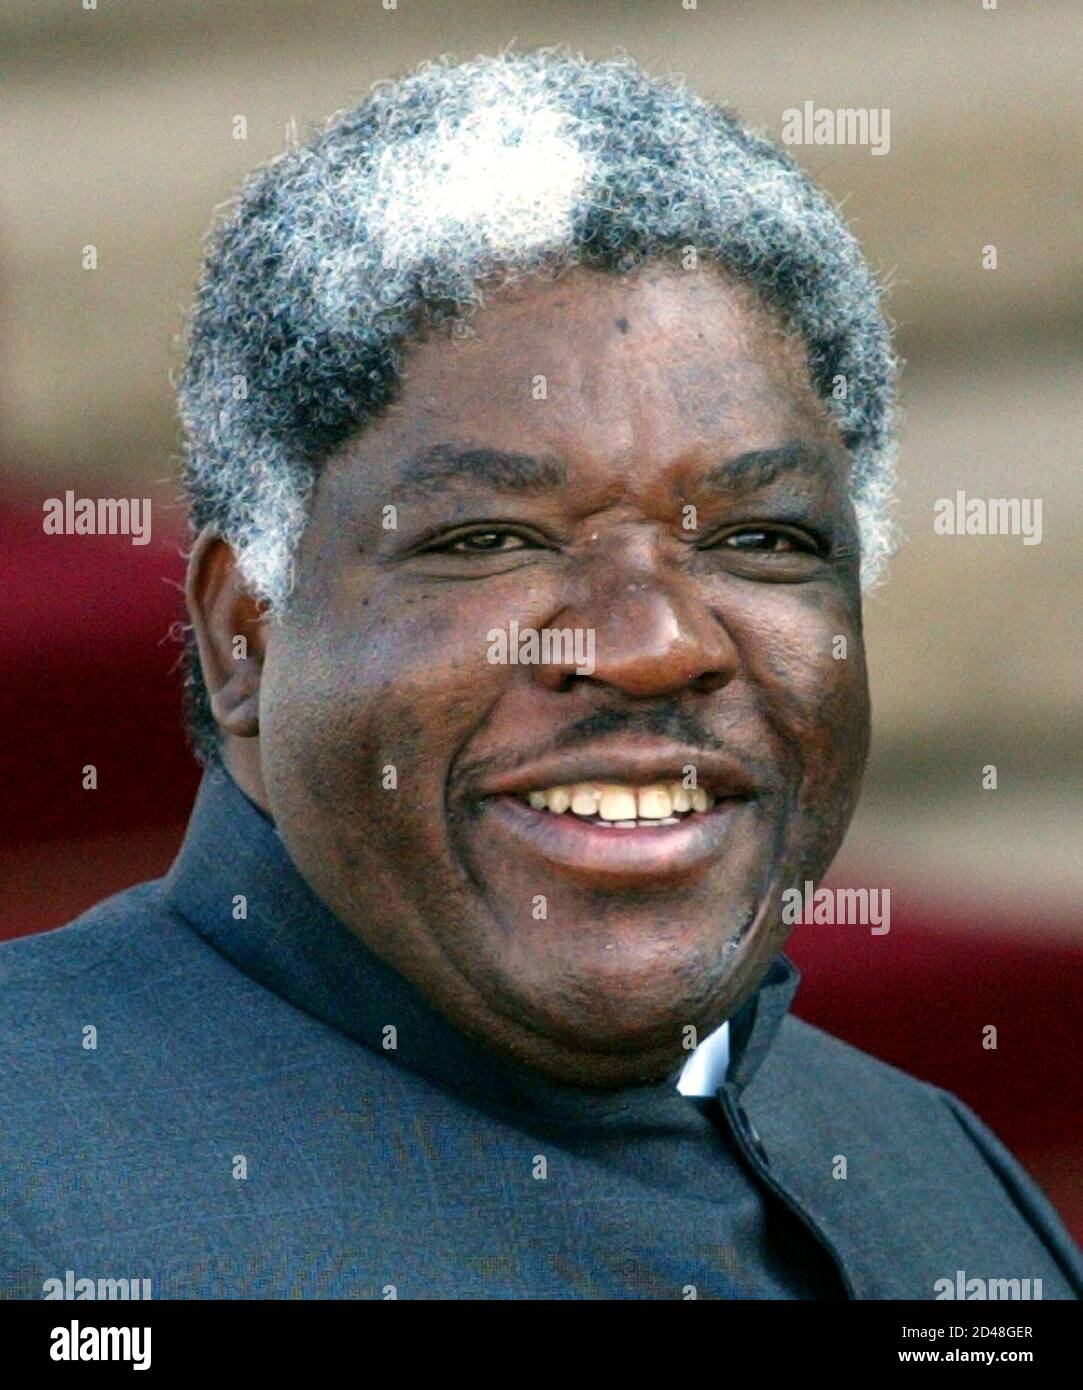 Nigerian president Levy Mwanawasa arrives for the inauguration of South  African President Thabo Mbeki April 27, 2004. Mbeki's inauguration at the  Union Buildings in Pretoria was timed to coincide with celebrations to